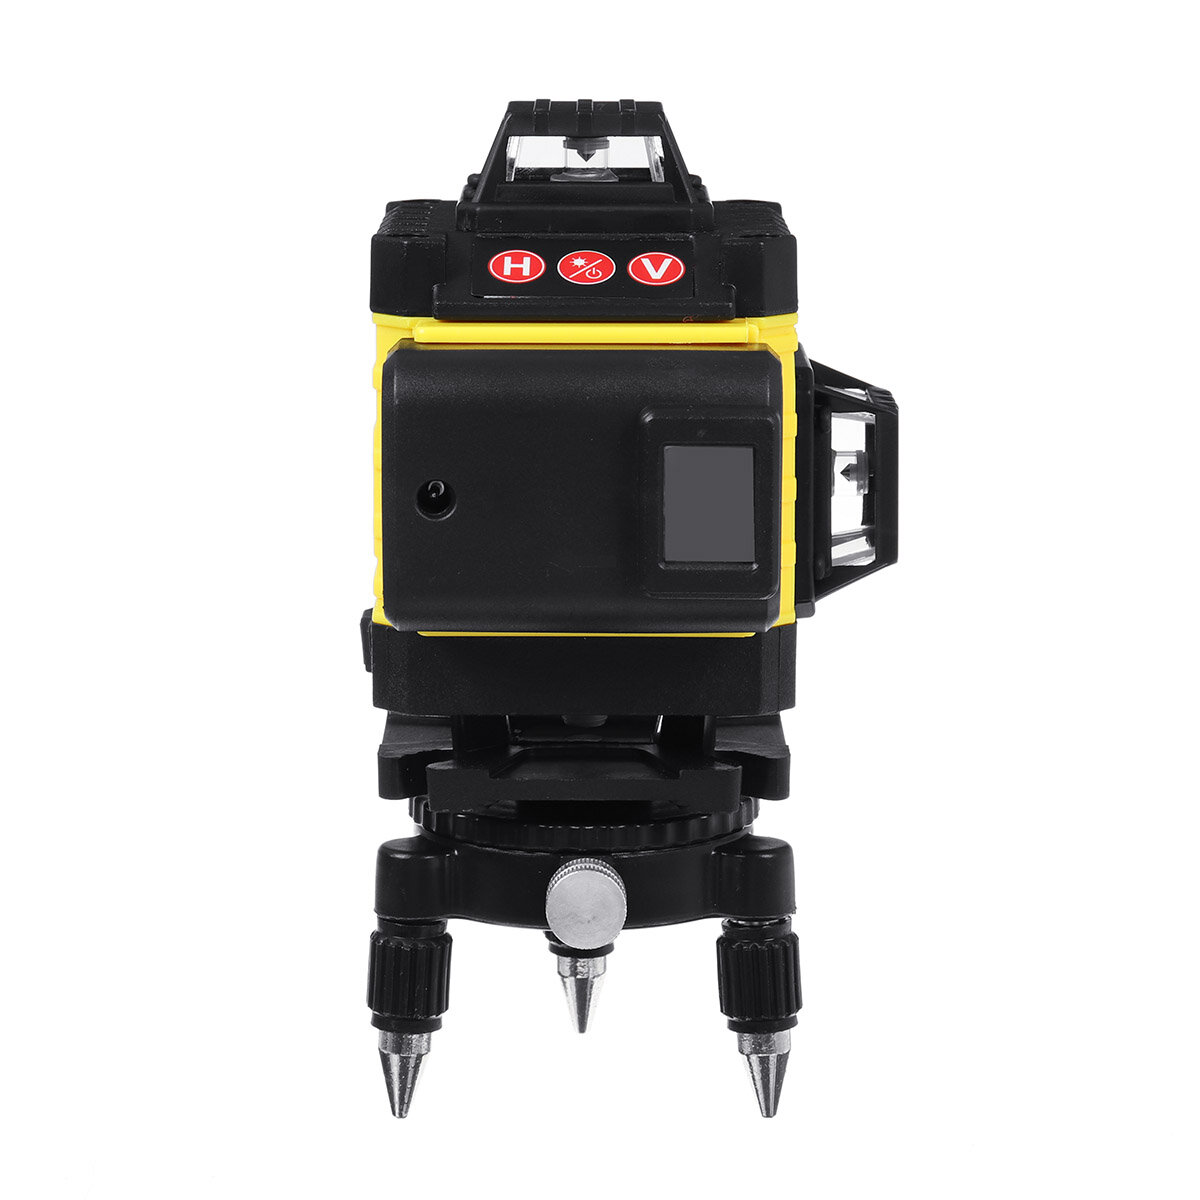 Image of 12/16 Line 4D Laser Level Green Light Digital Self Leveling 360° Rotary Measure with 6000mah Battery